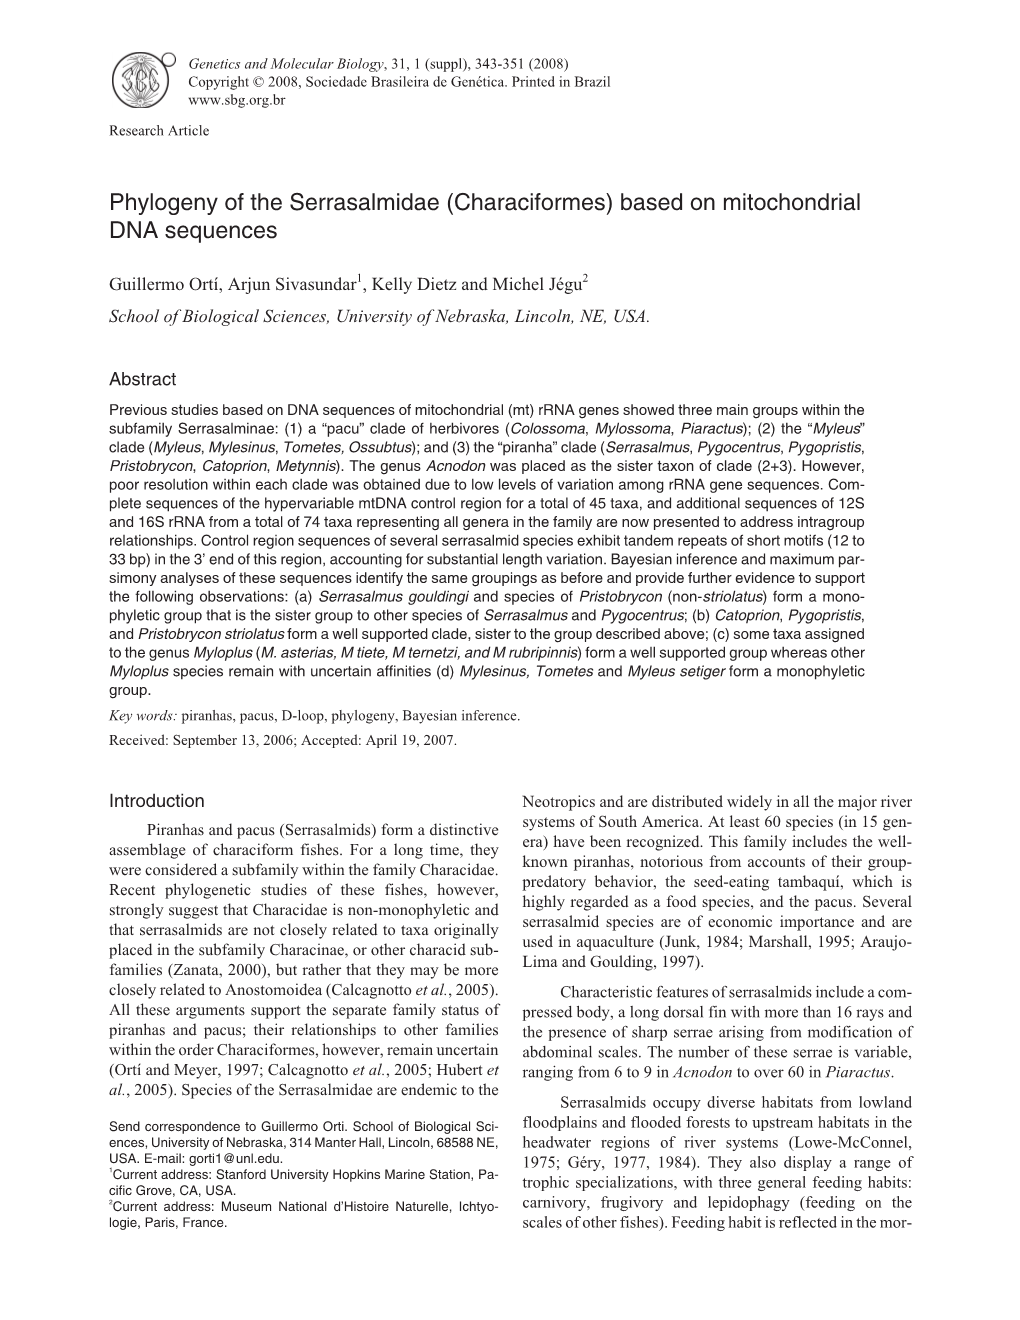 Phylogeny of the Serrasalmidae (Characiformes) Based on Mitochondrial DNA Sequences